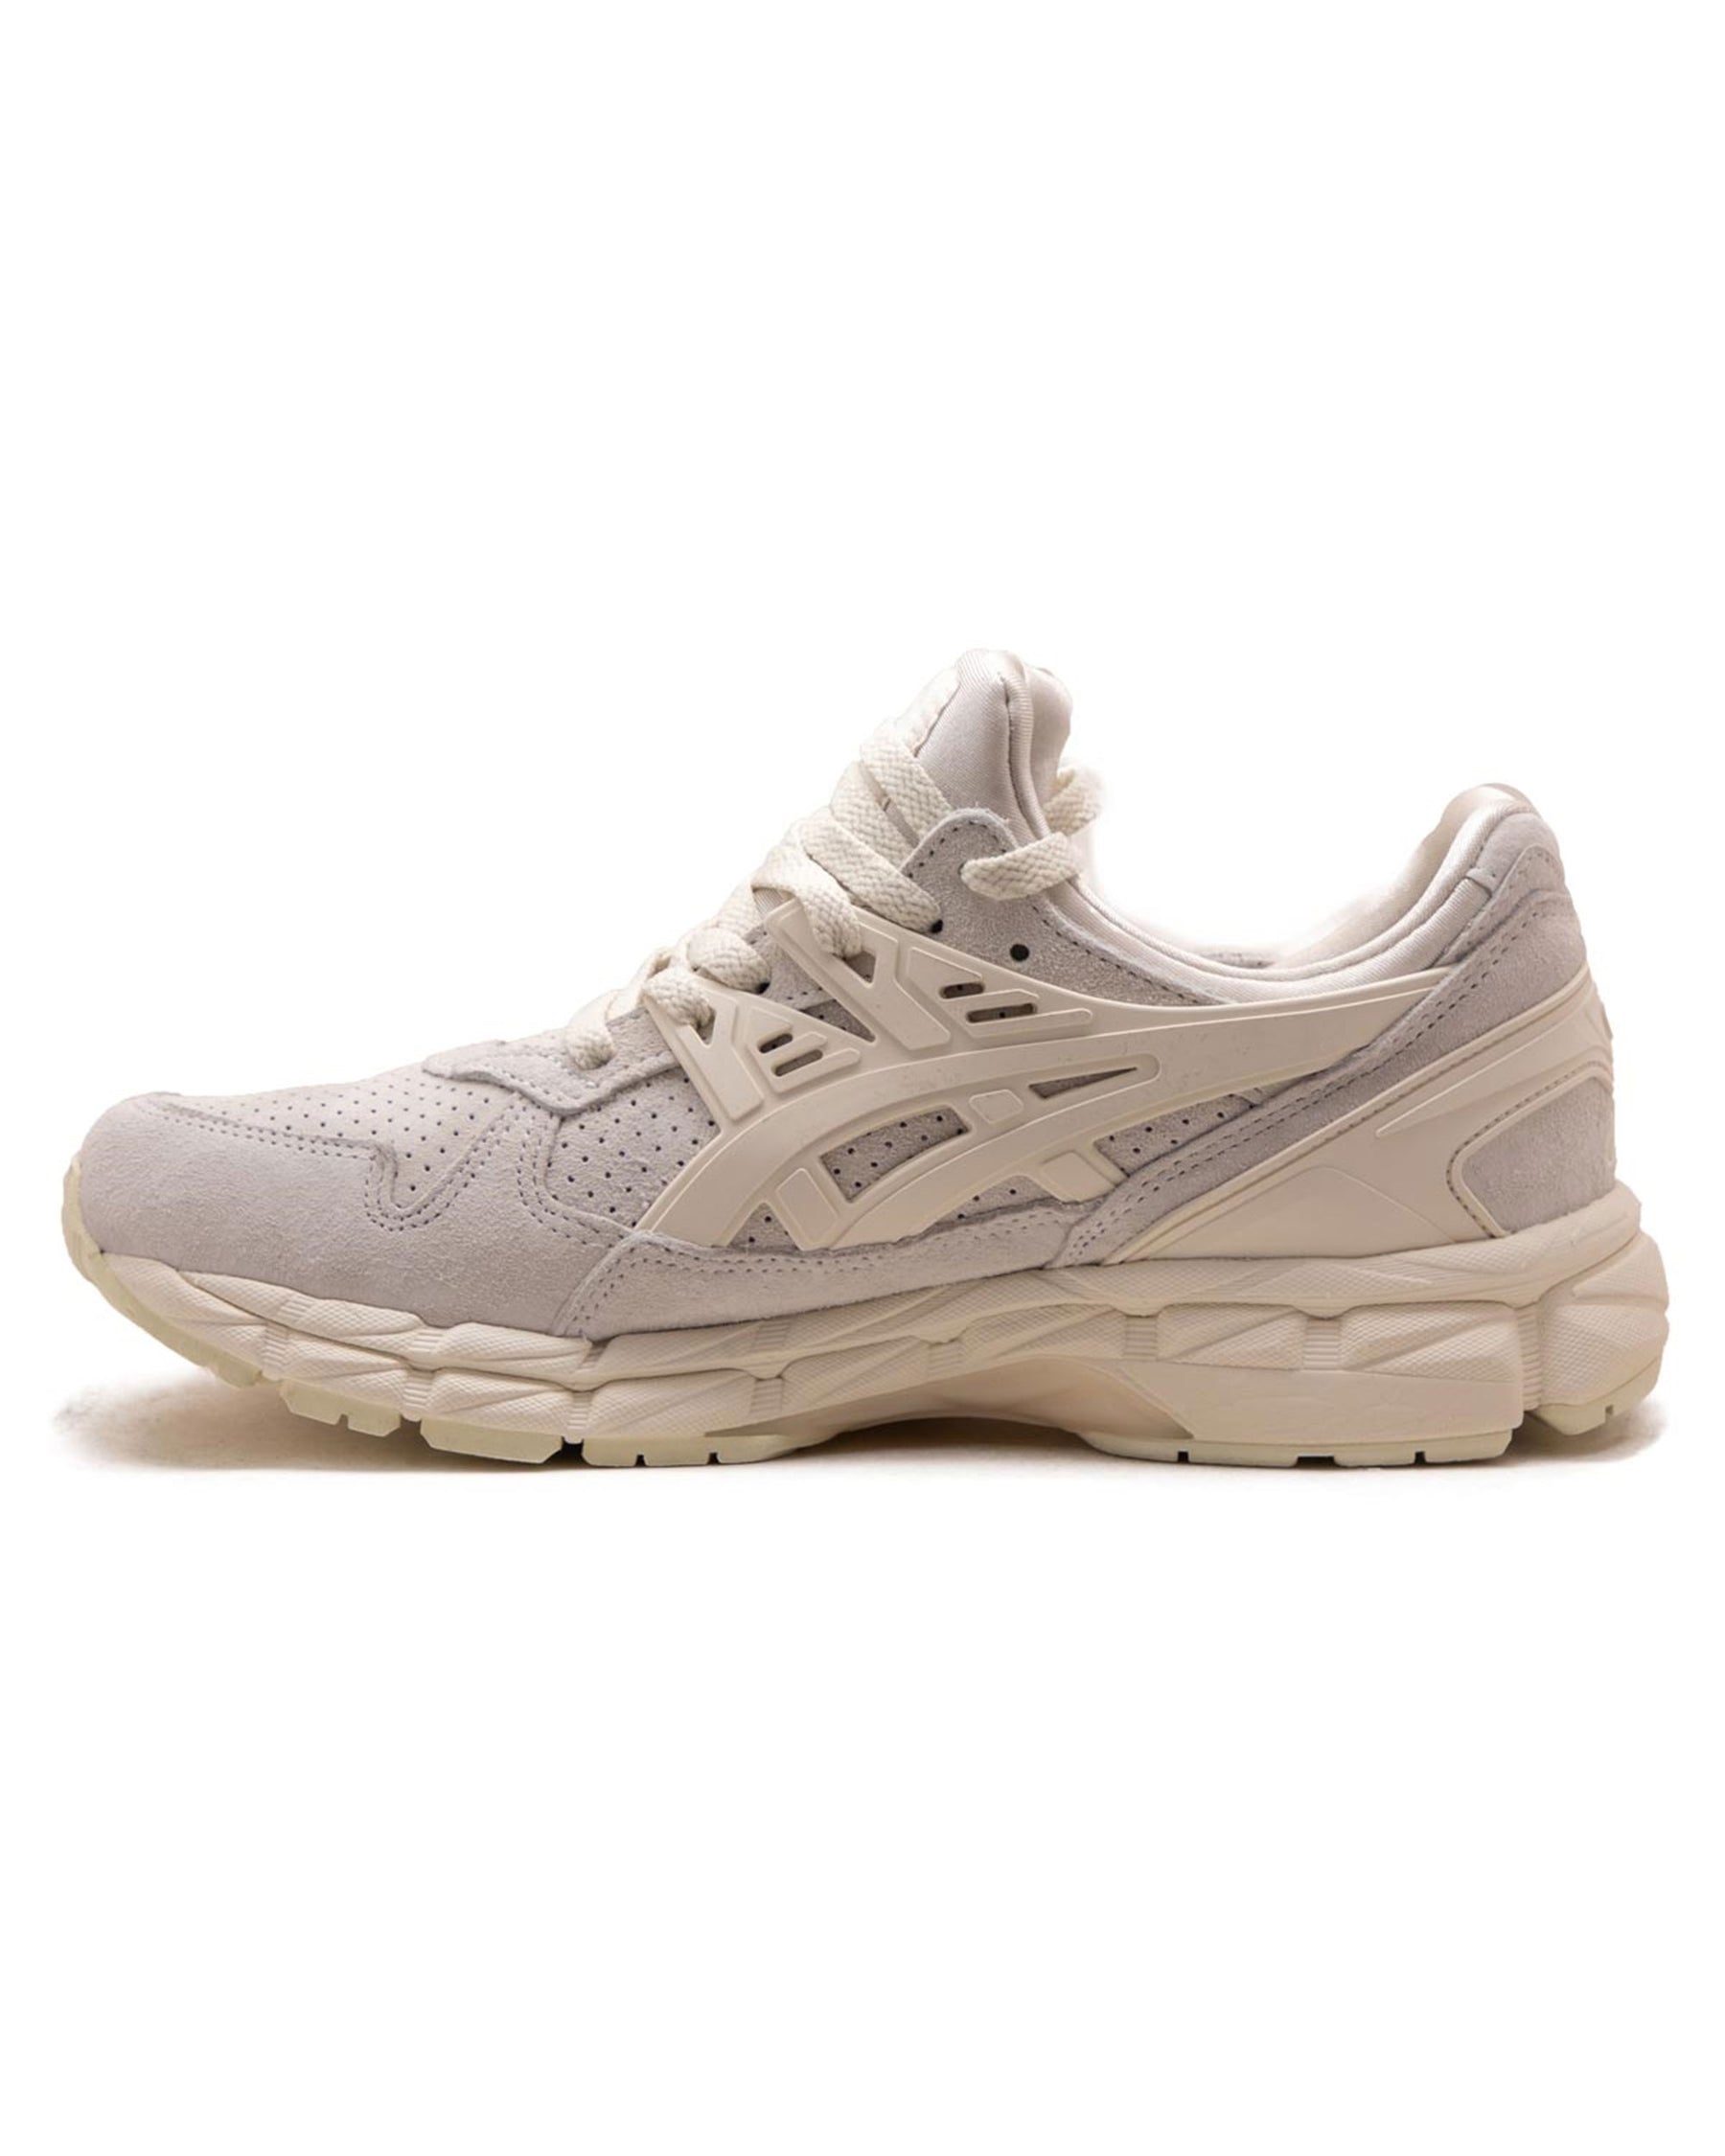 Asics Gel Kayano Trainer 21 Suede 1201A067-201